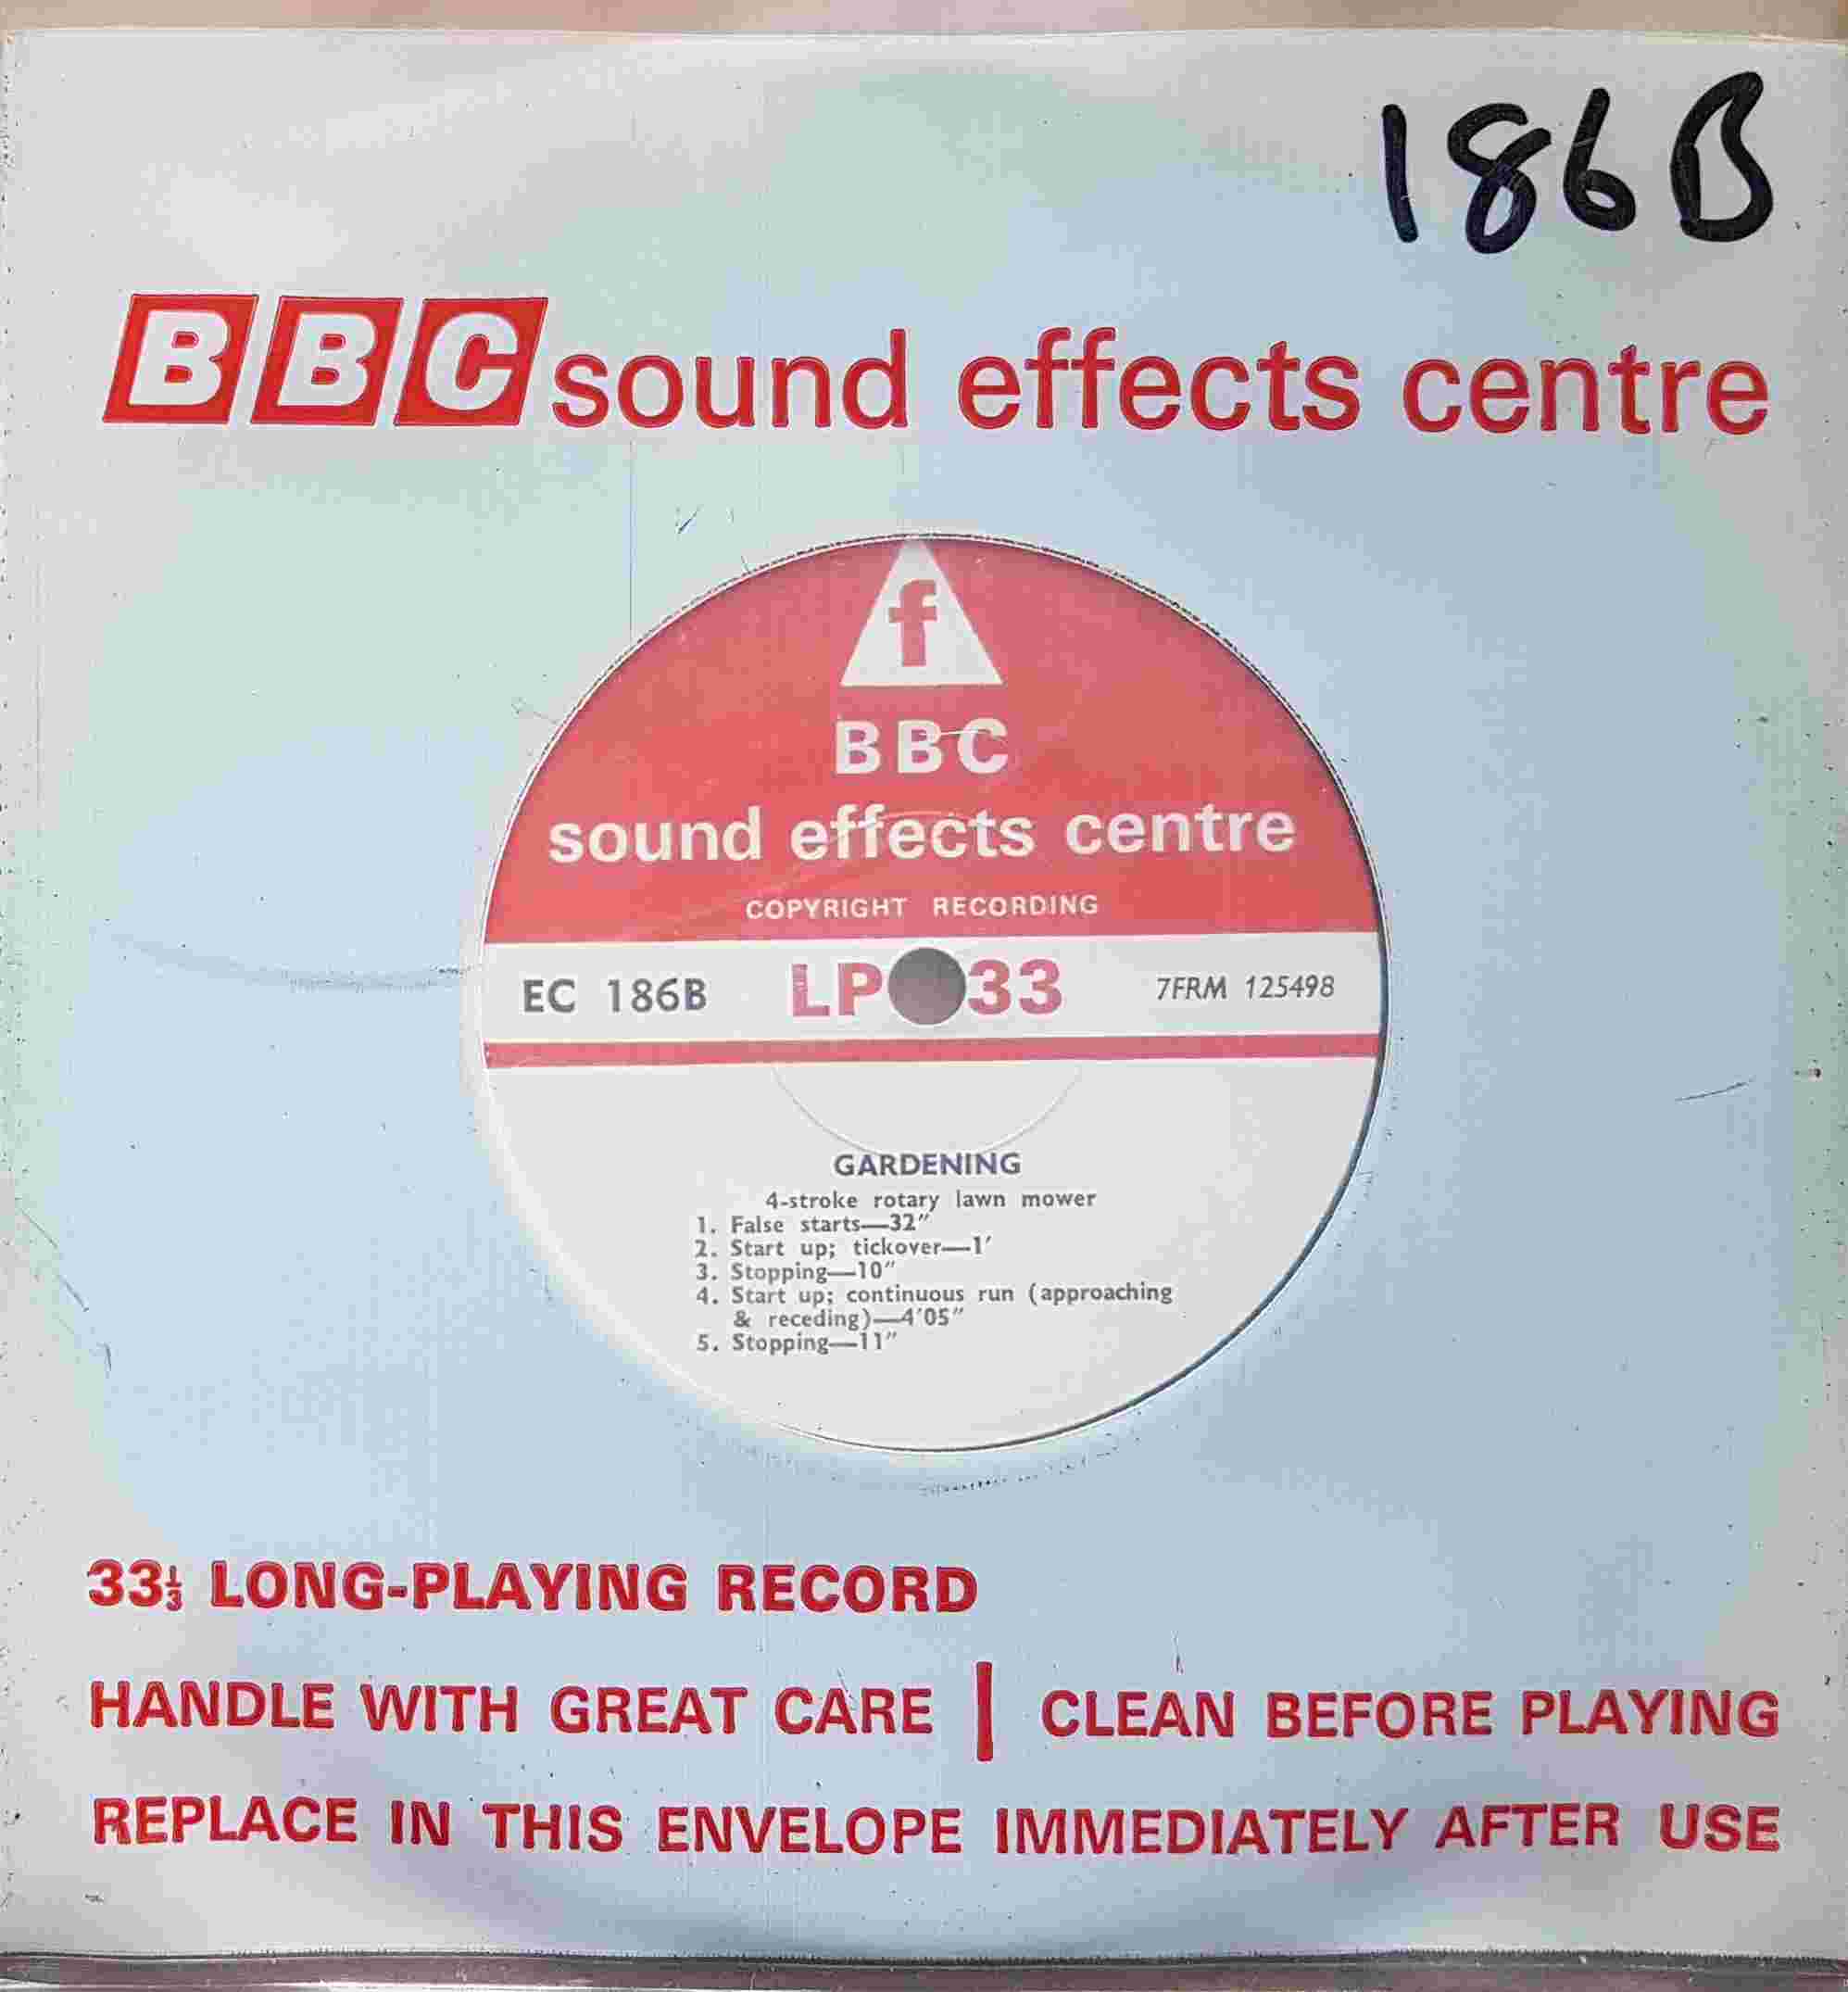 Picture of EC 186B Gardening by artist Not registered from the BBC singles - Records and Tapes library